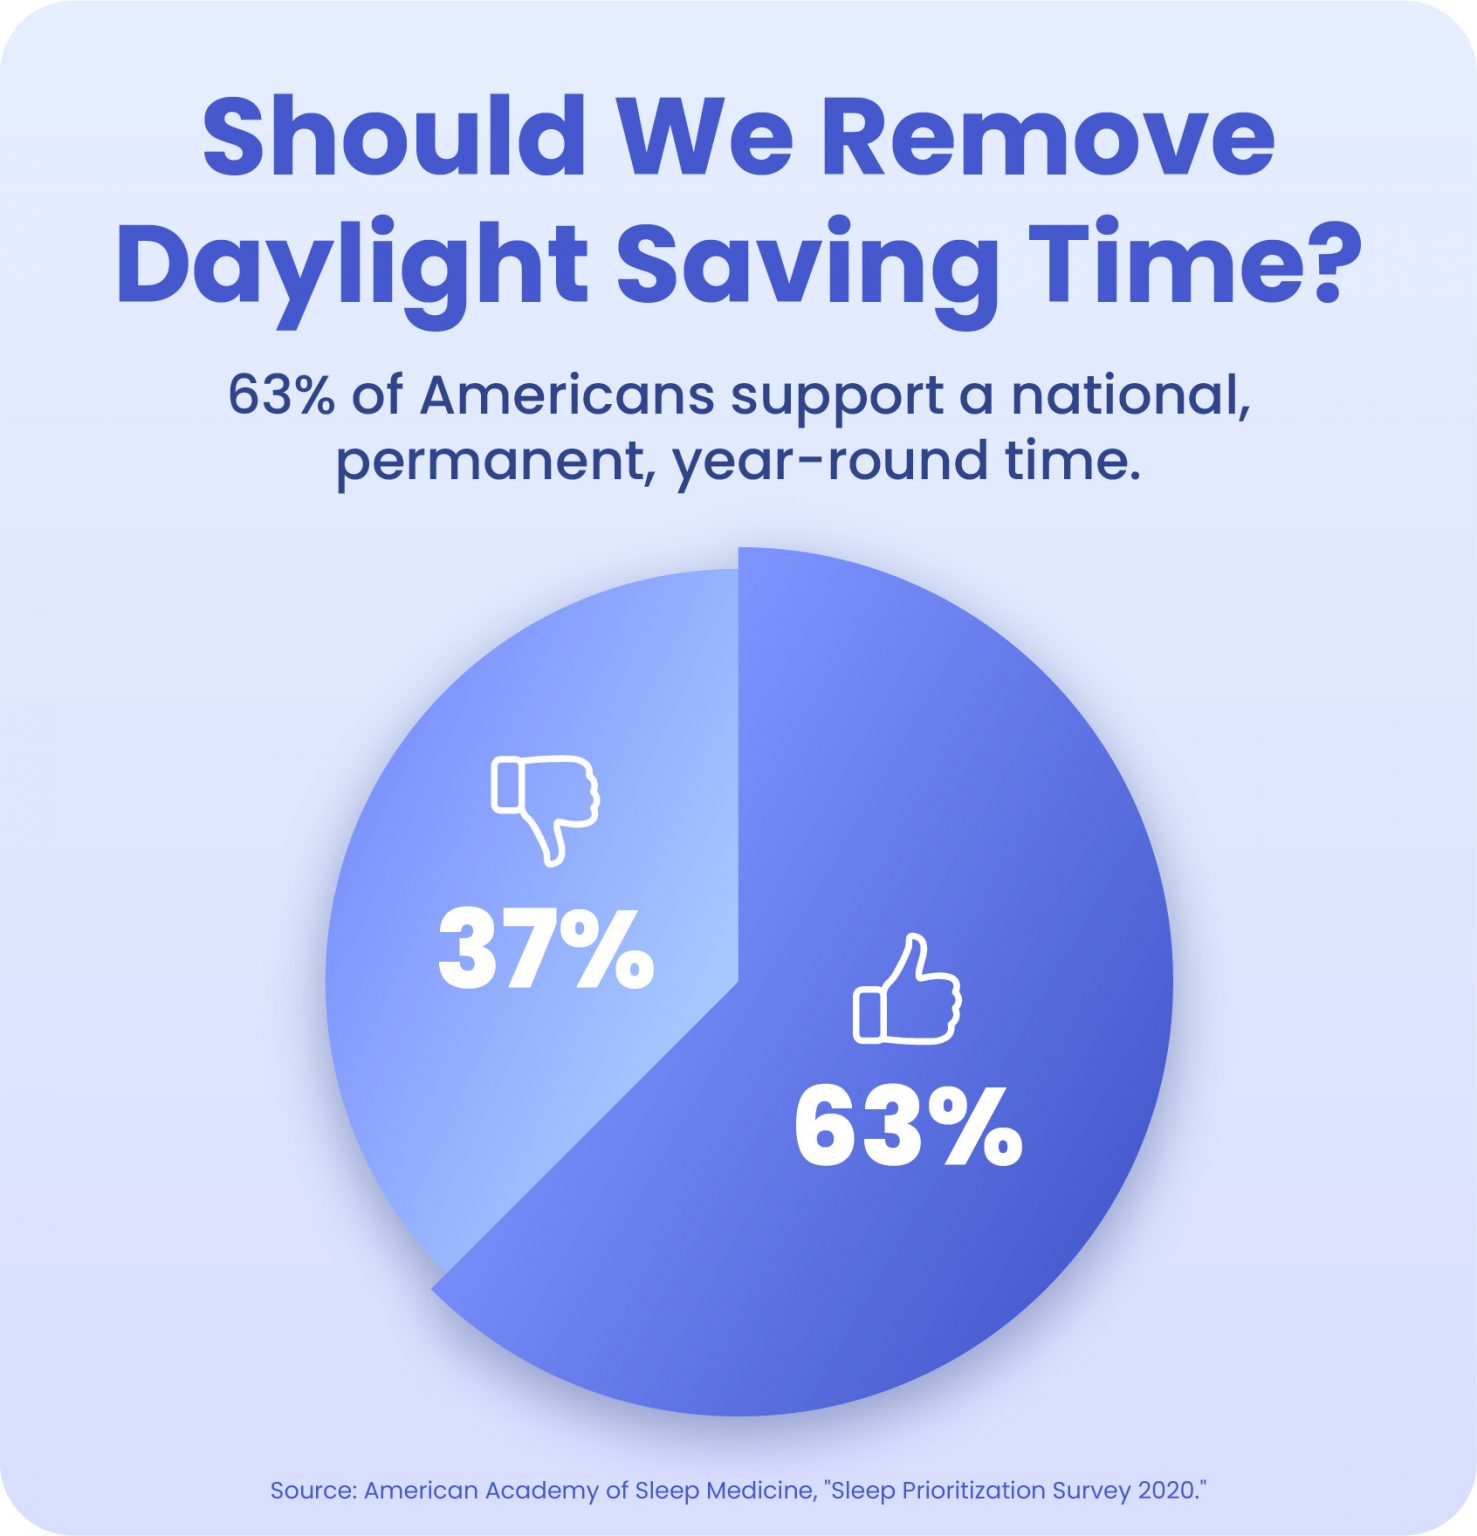 60% of Americans support a National Permanent year-round time